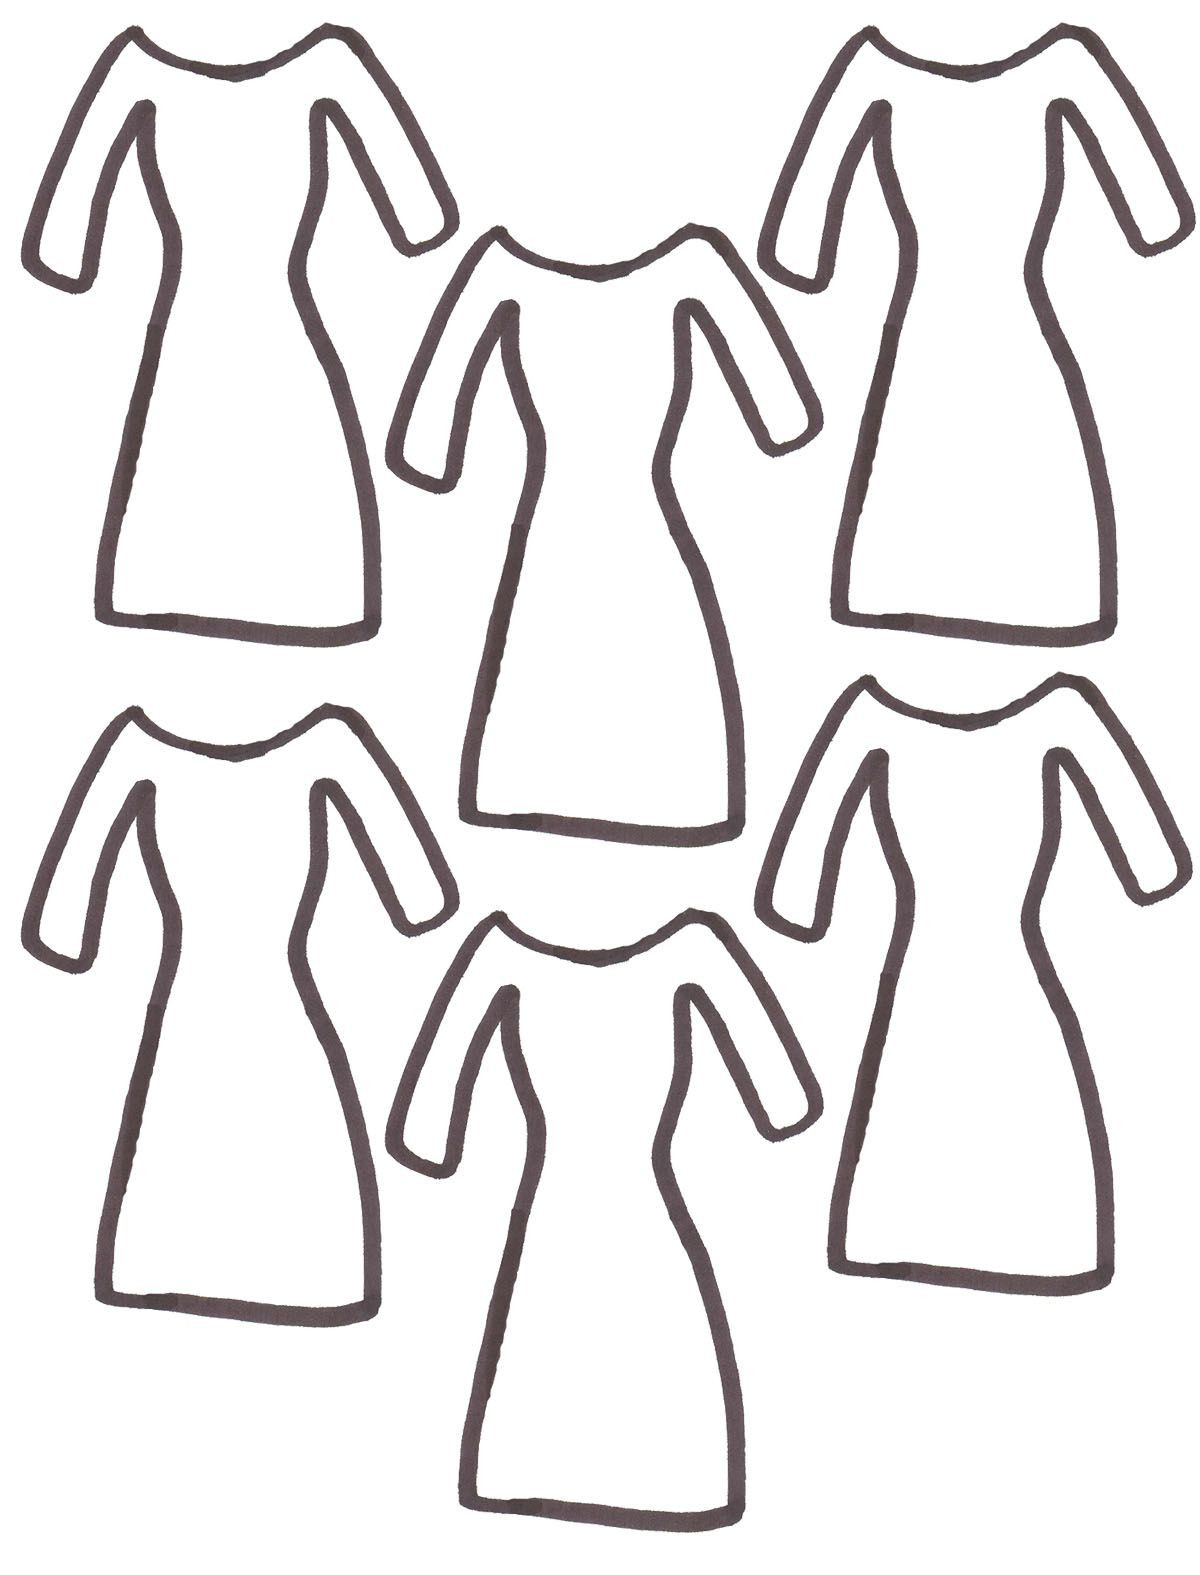 Printable Coloring Pages For Girls With Shirts
 Fashion Clothes Coloring Pages Coloring Home